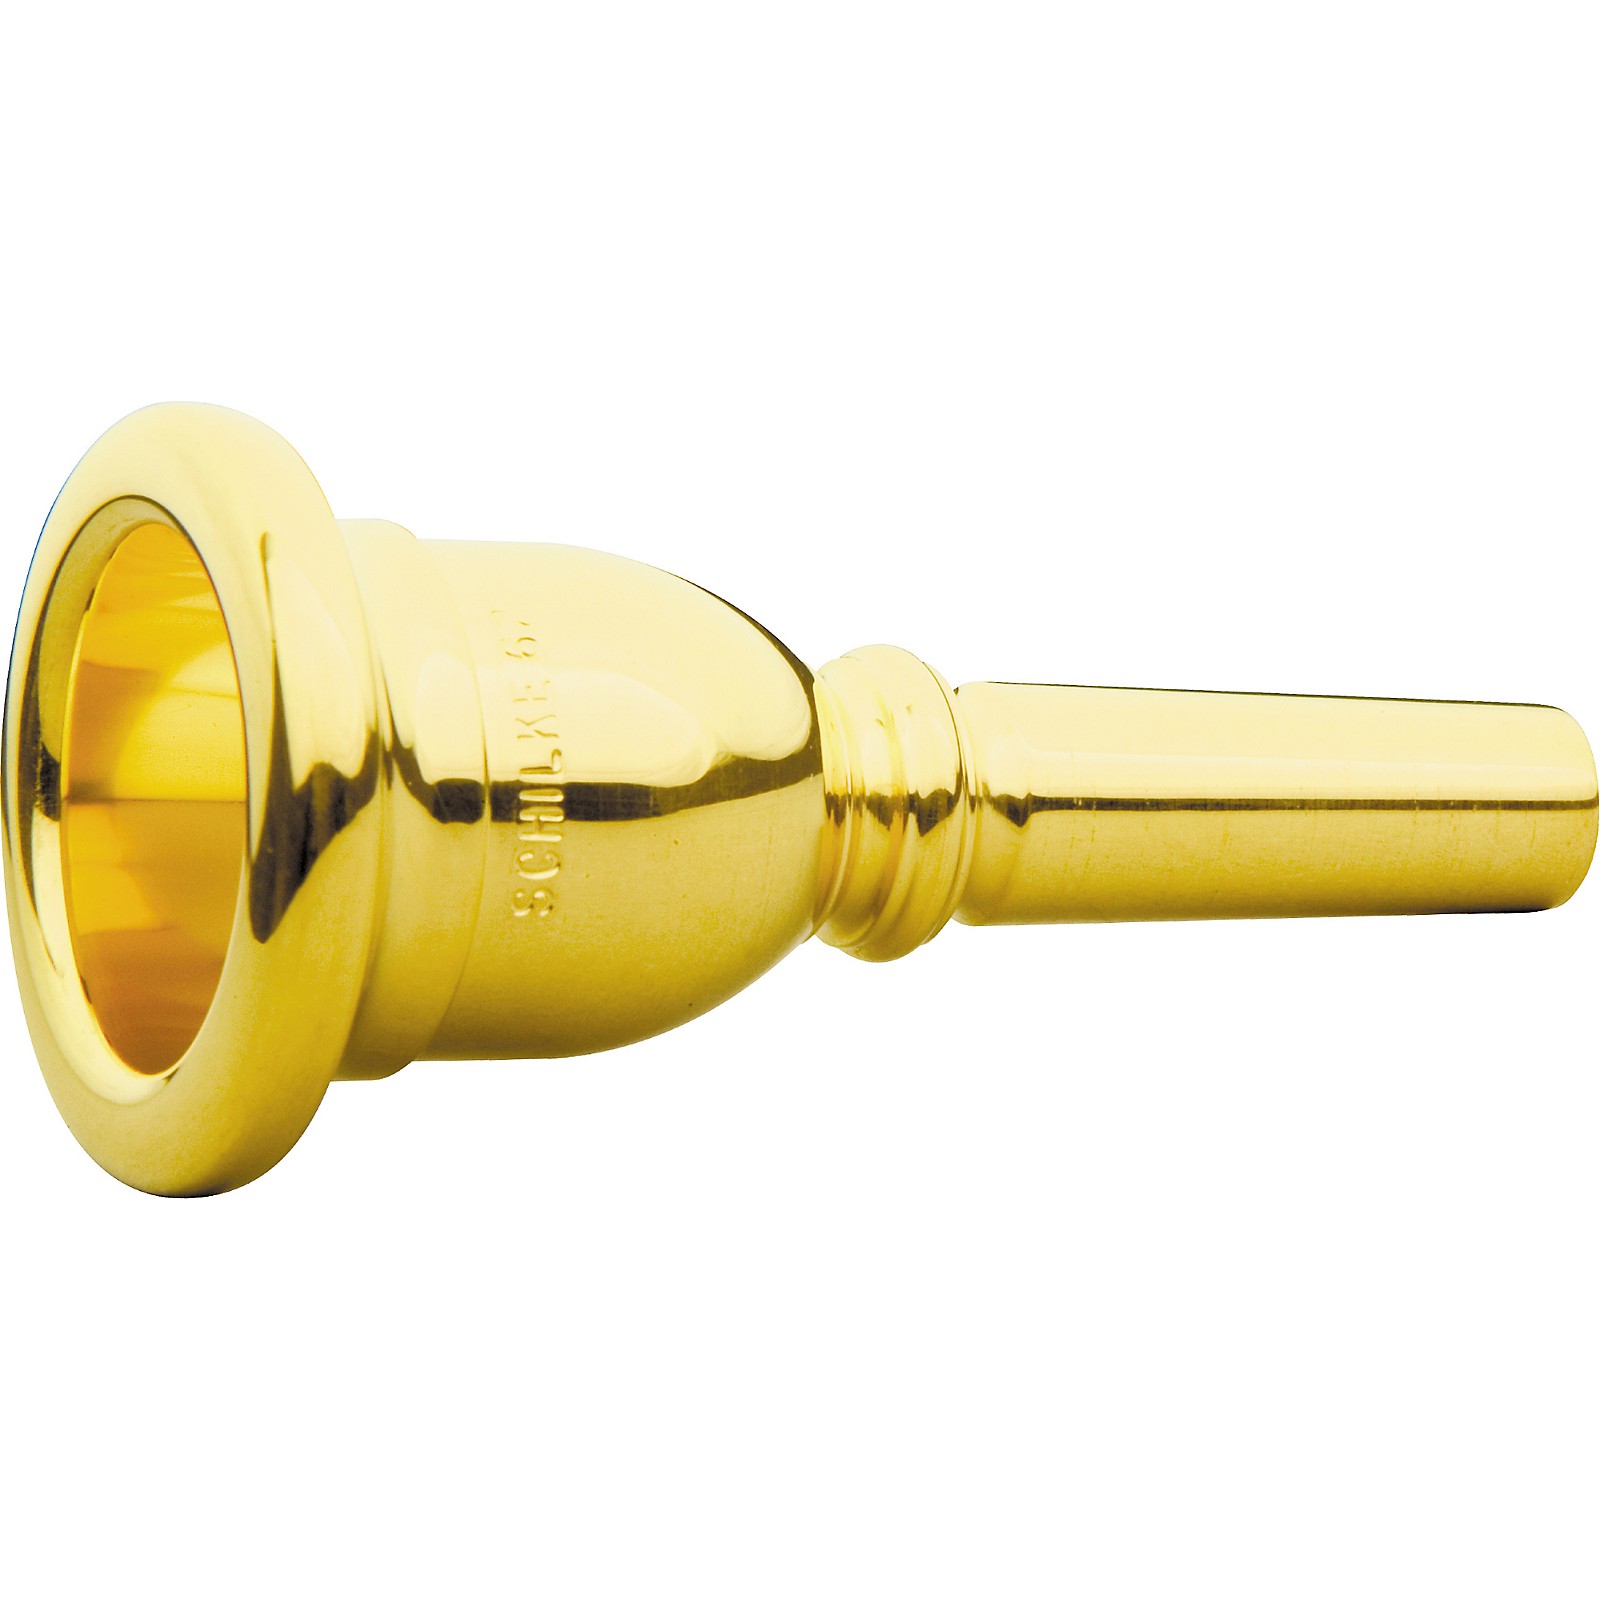 https://media.musicarts.com/is/image/MMGS7/Standard-Series-Tuba-Mouthpiece-in-Gold-62-Gold/475212000932901-00-1600x1600.jpg